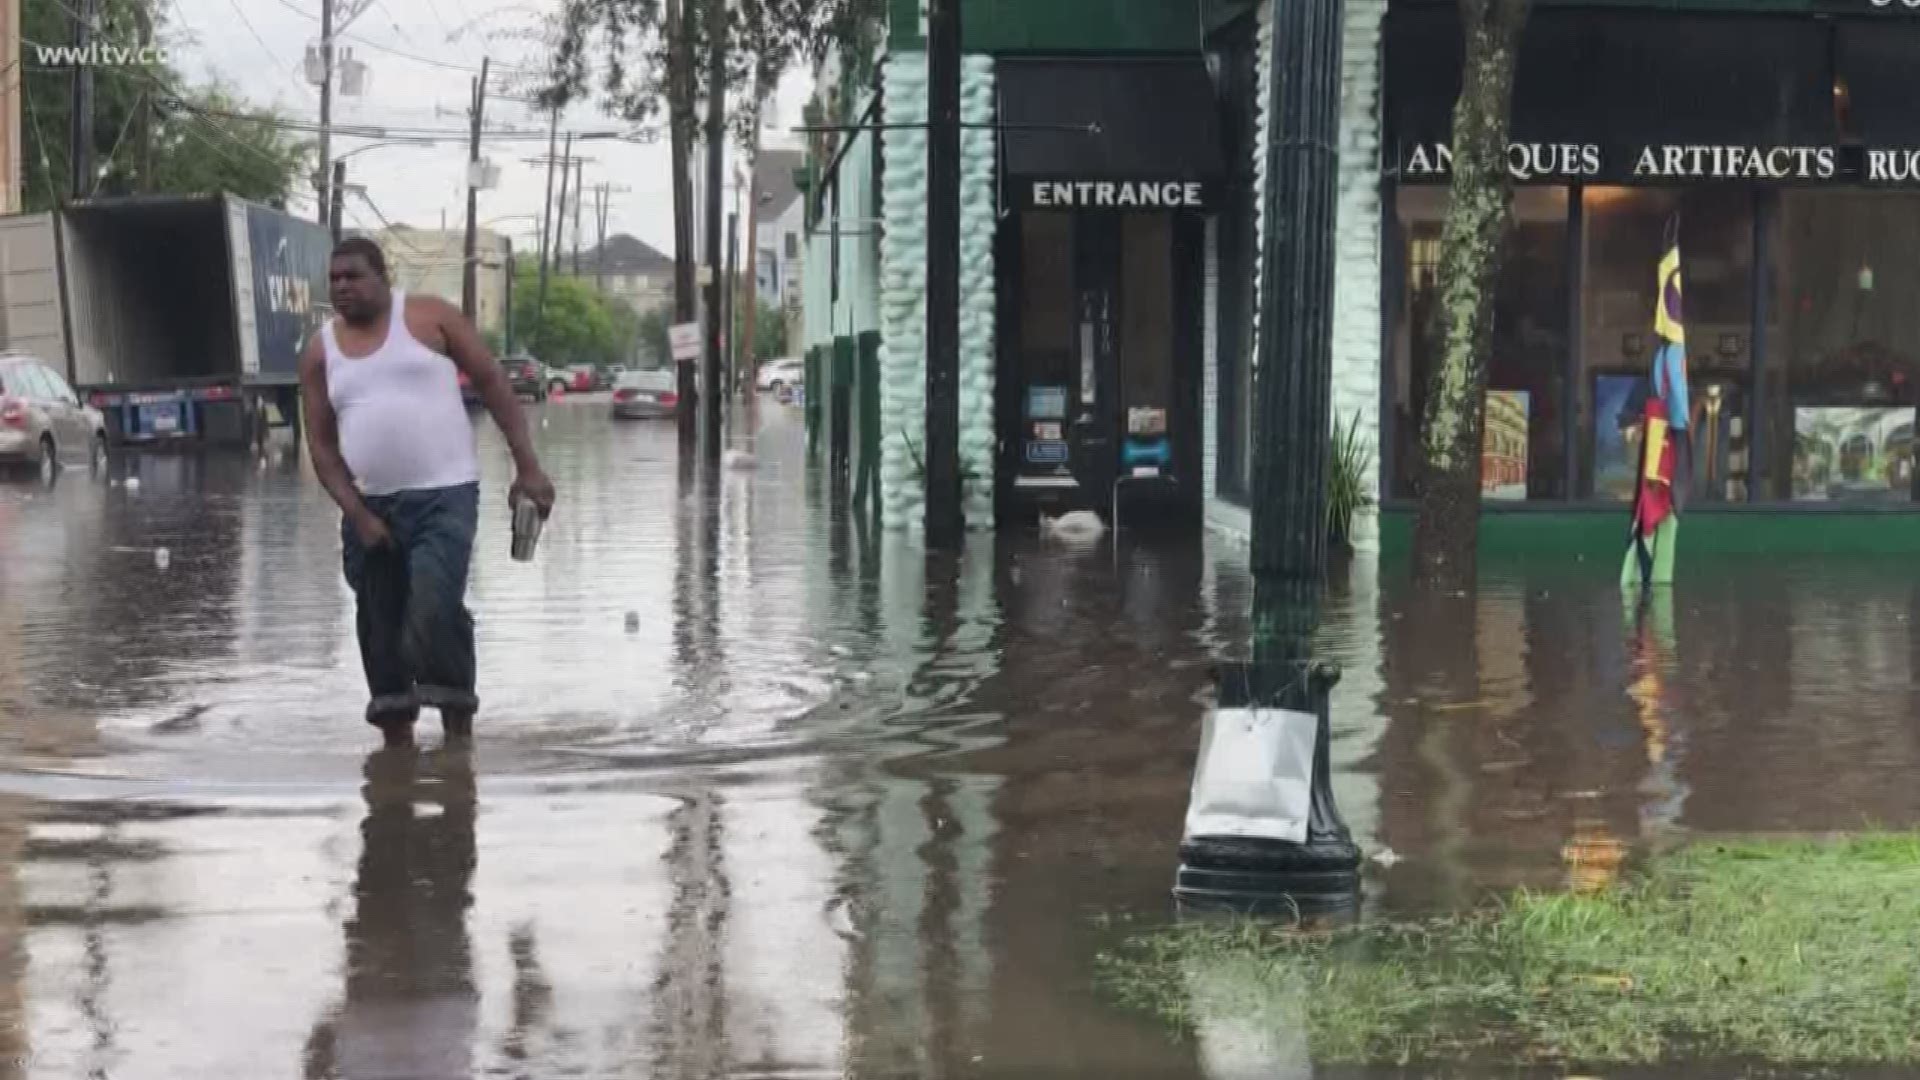 There are concerns that the $1 billion federal drainage project Uptown could be making flodoign worse in area of New Orleans that rarely flooded before.